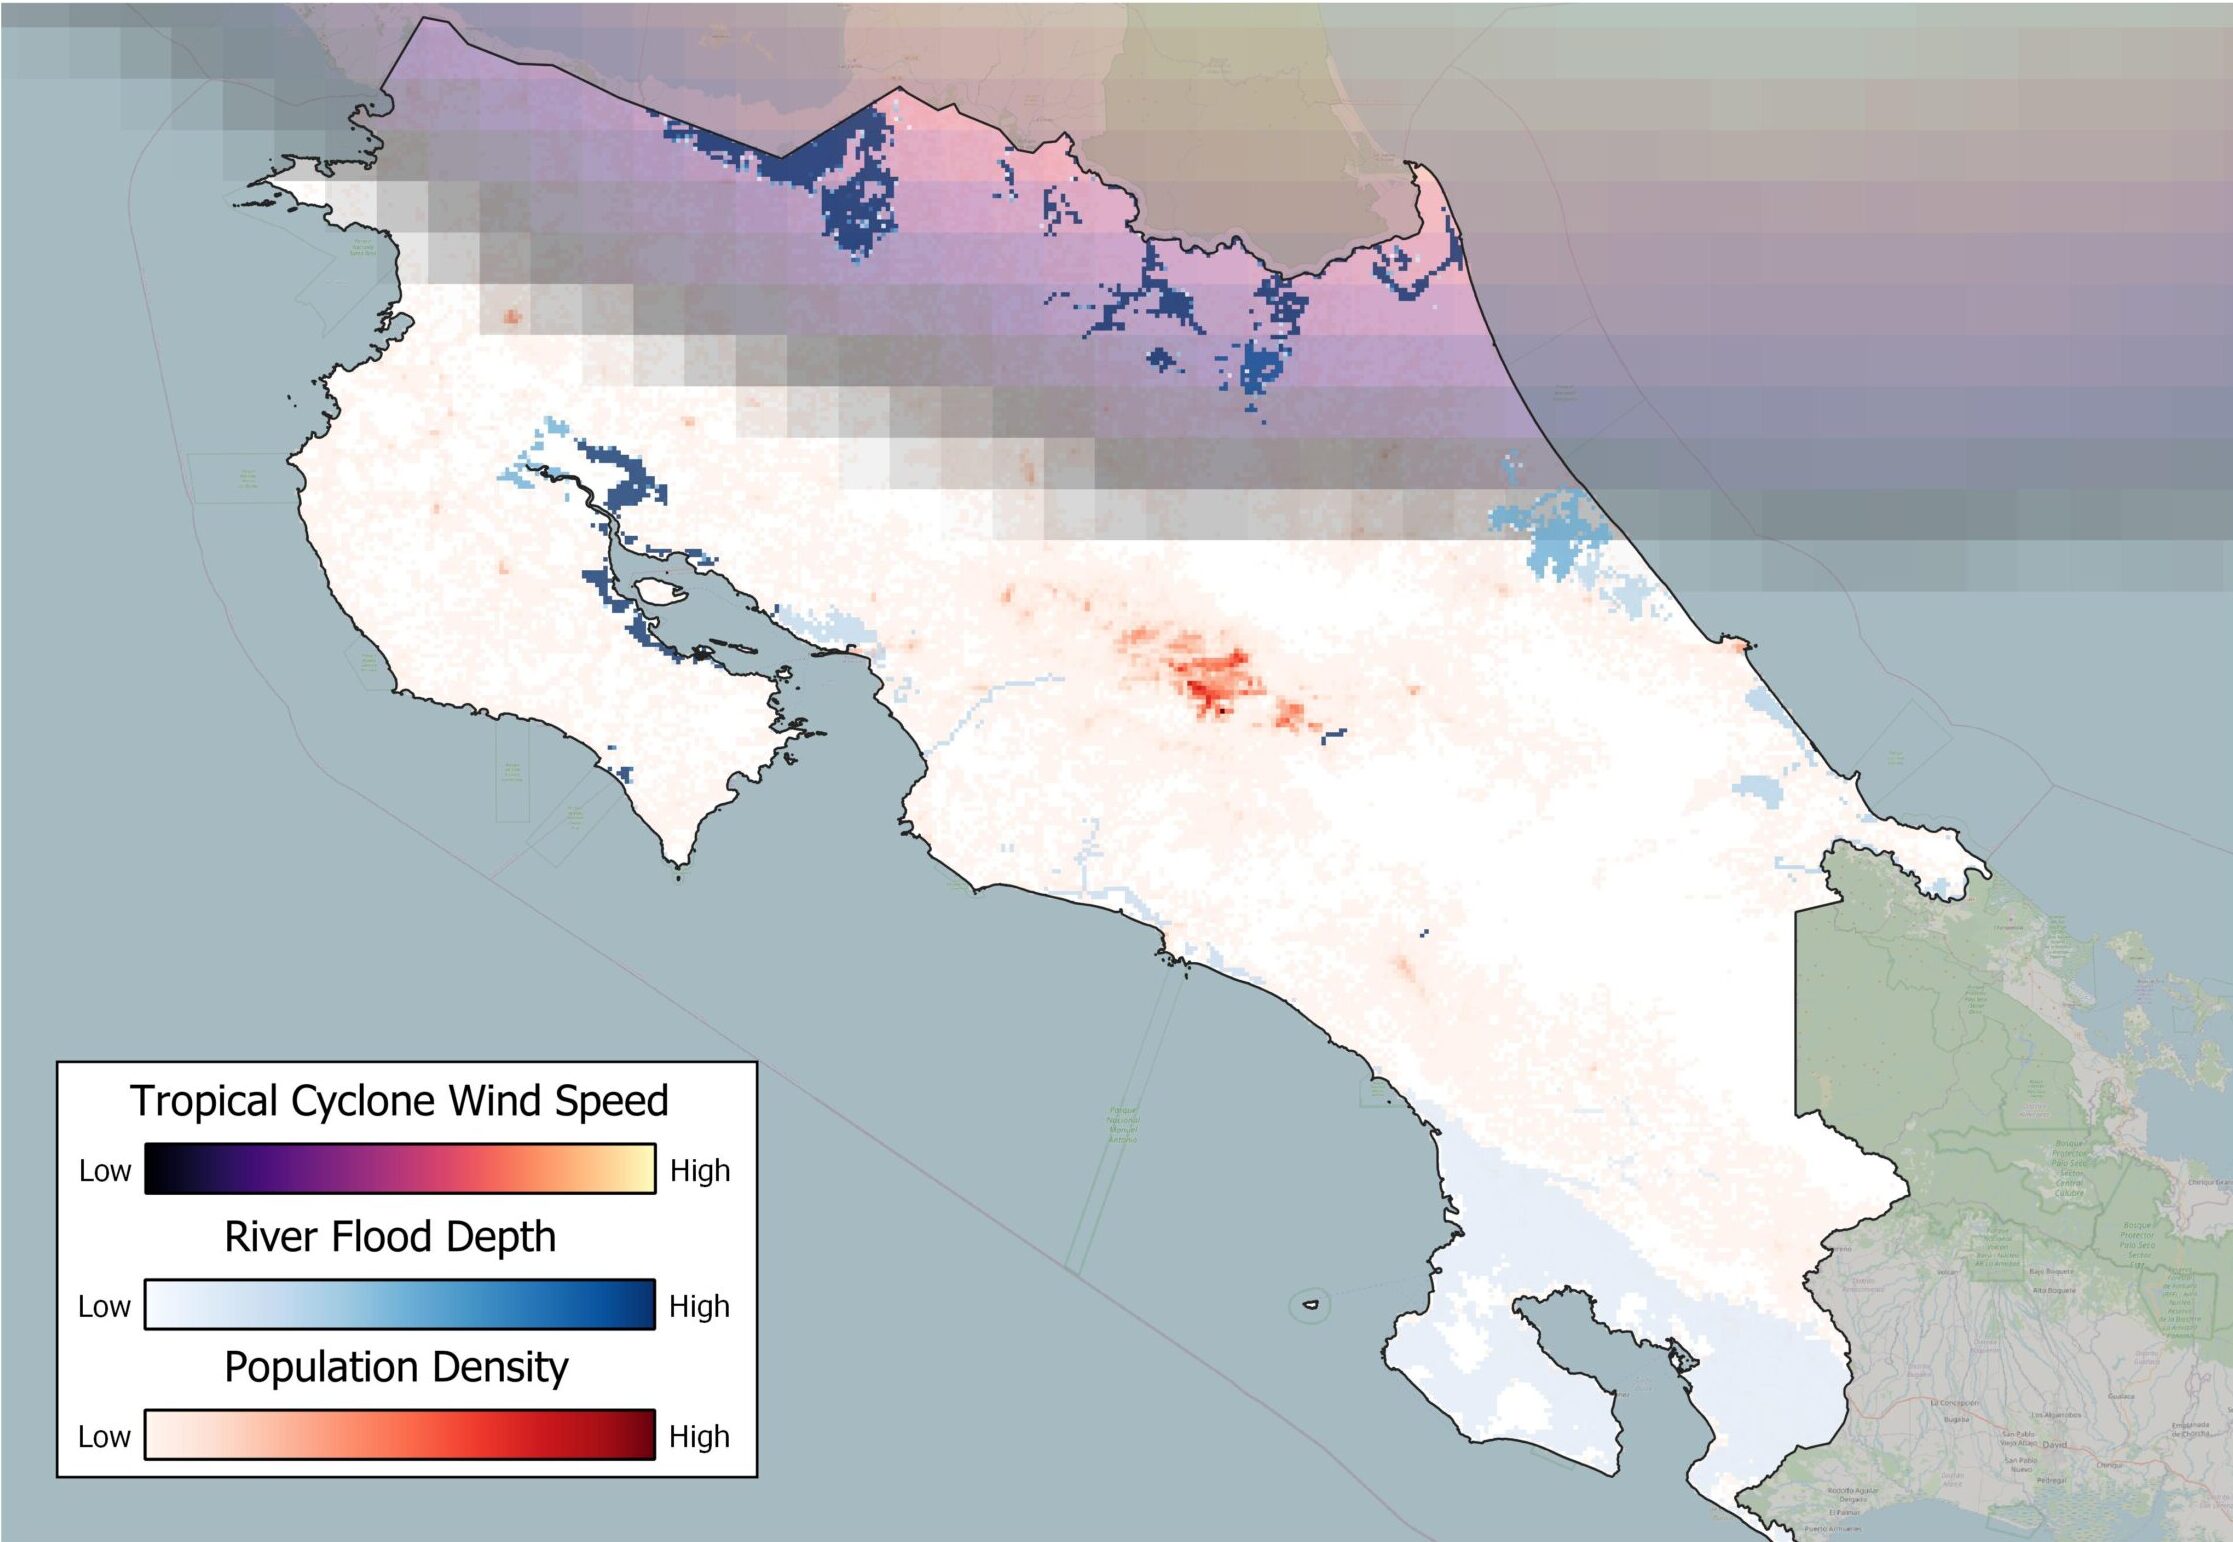 Mapping population exposure to flooding and tropical cyclones.